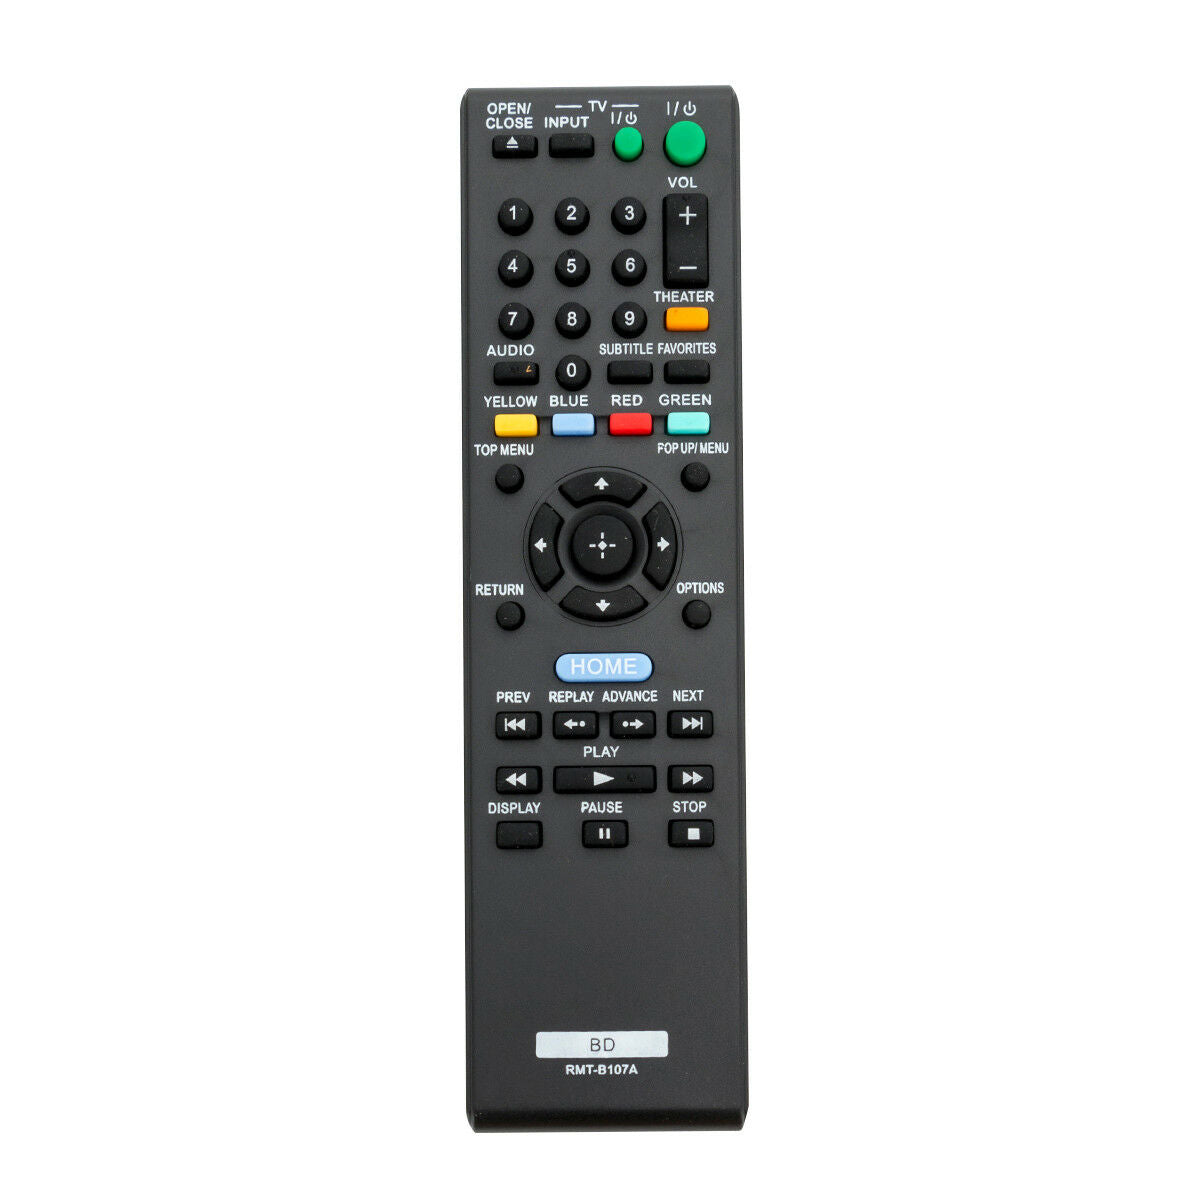 RMT-B107A Replacement Remote Control For Sony BDP-S370 BDP-S470 Blu-Ray DVD Player